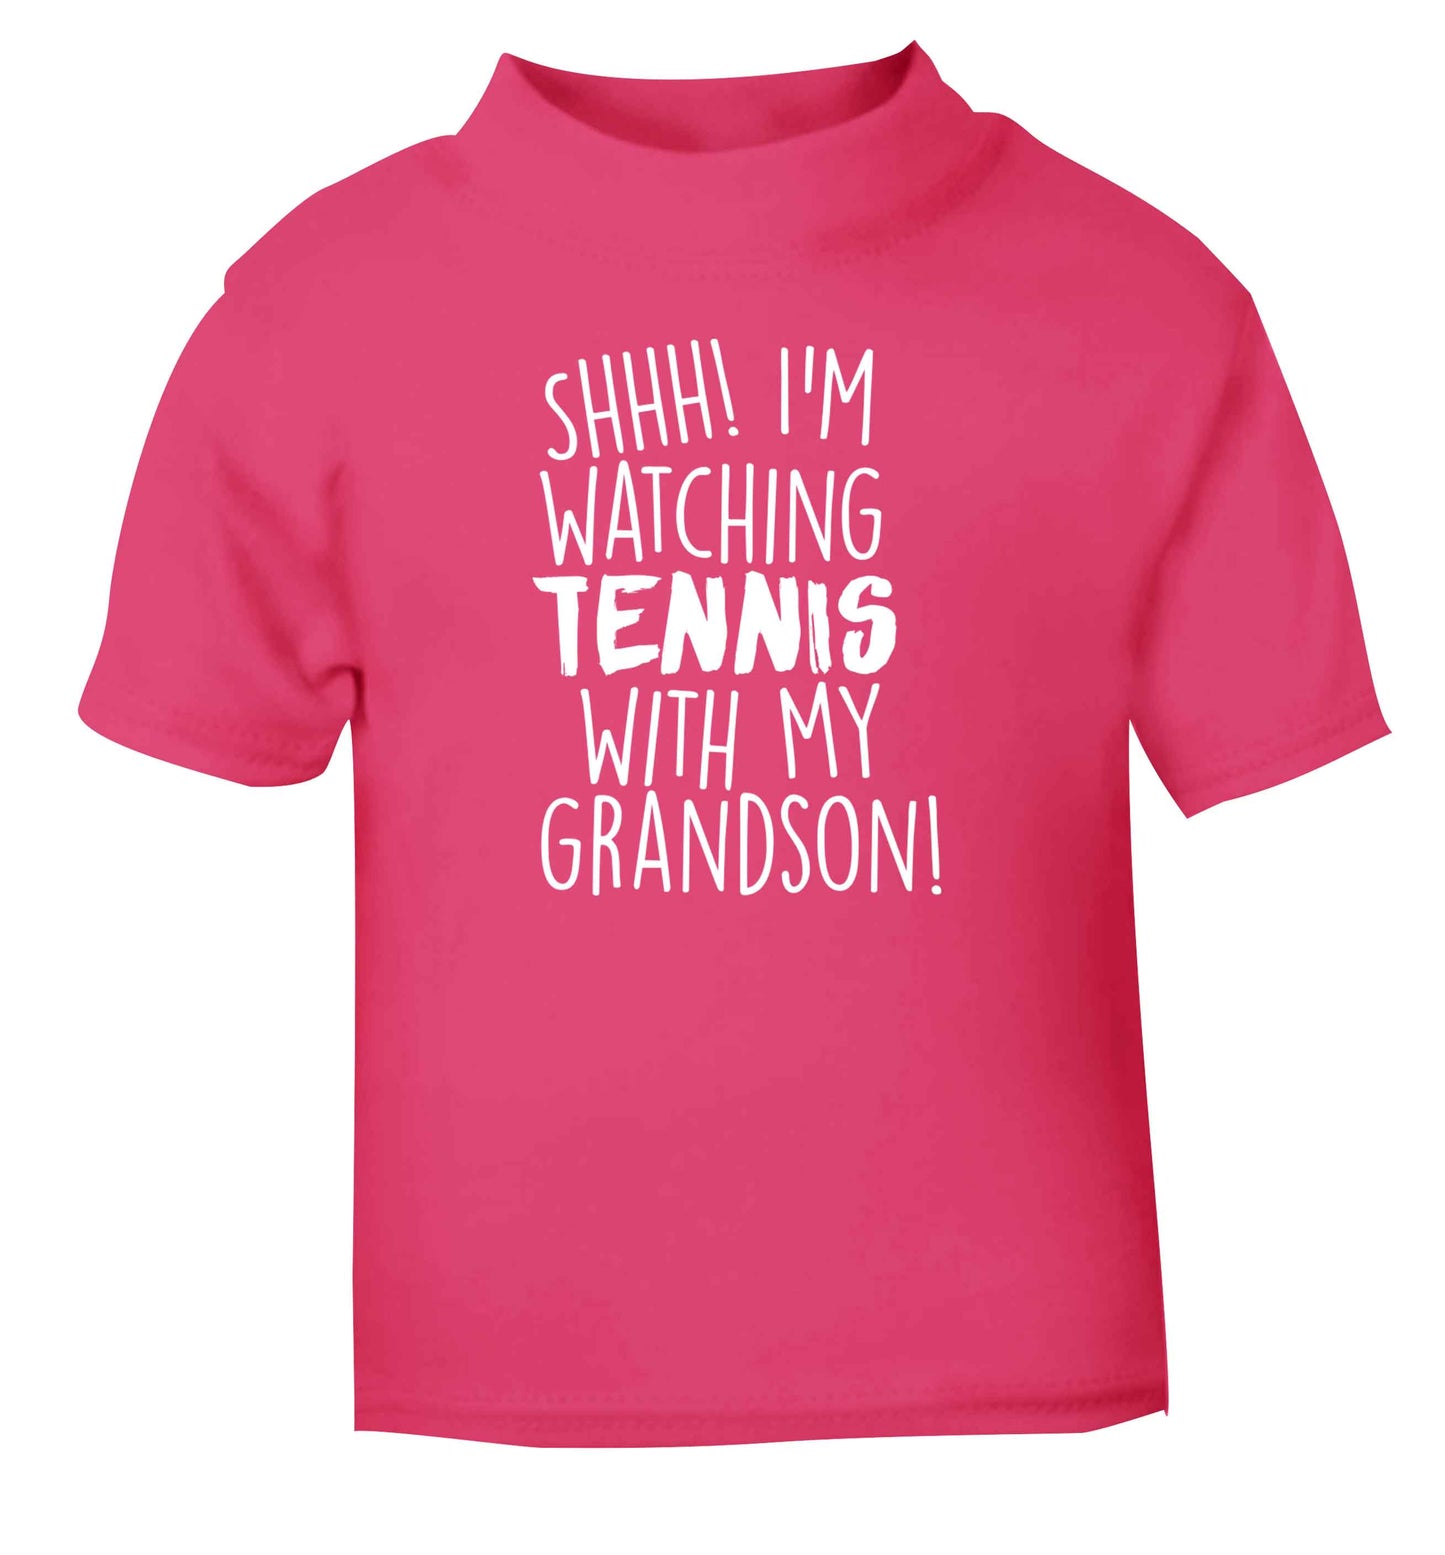 Shh! I'm watching tennis with my grandson! pink Baby Toddler Tshirt 2 Years